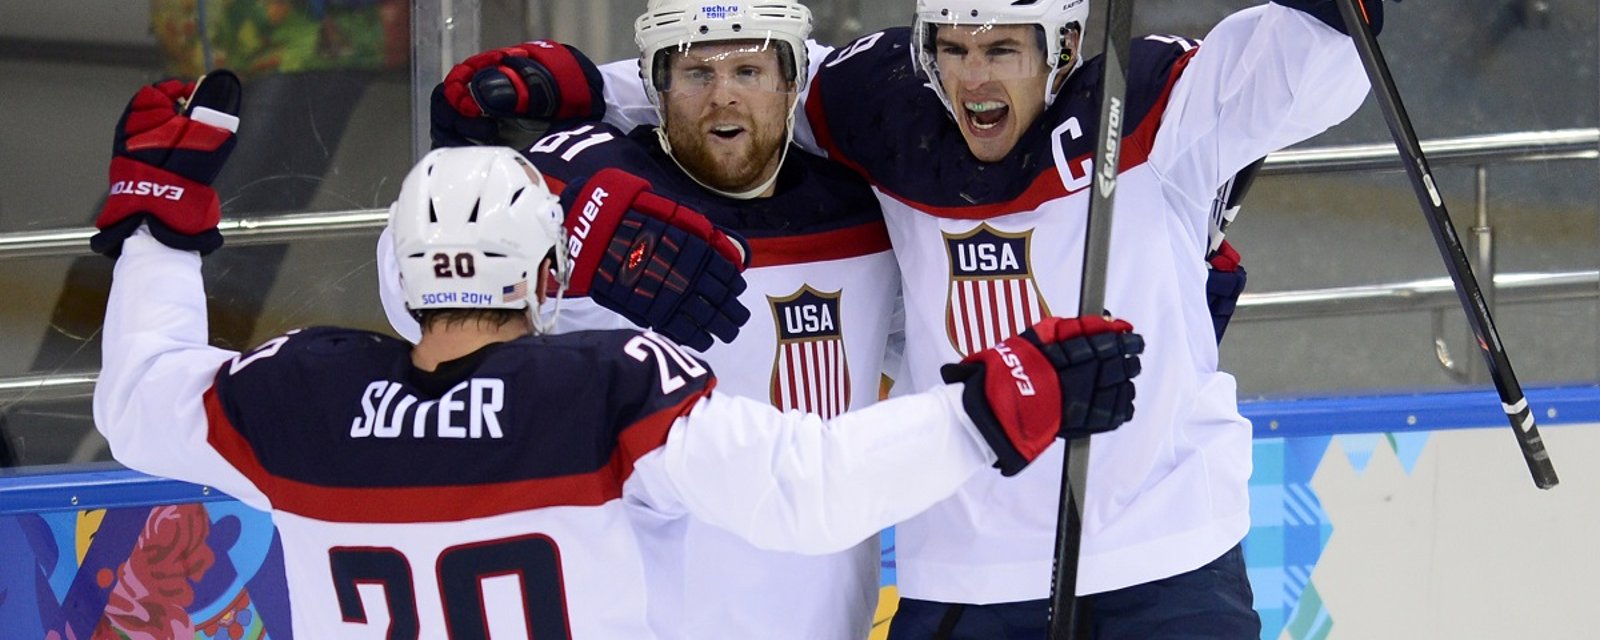 Member of Team USA says Phil Kessel's comments “will be remembered.”